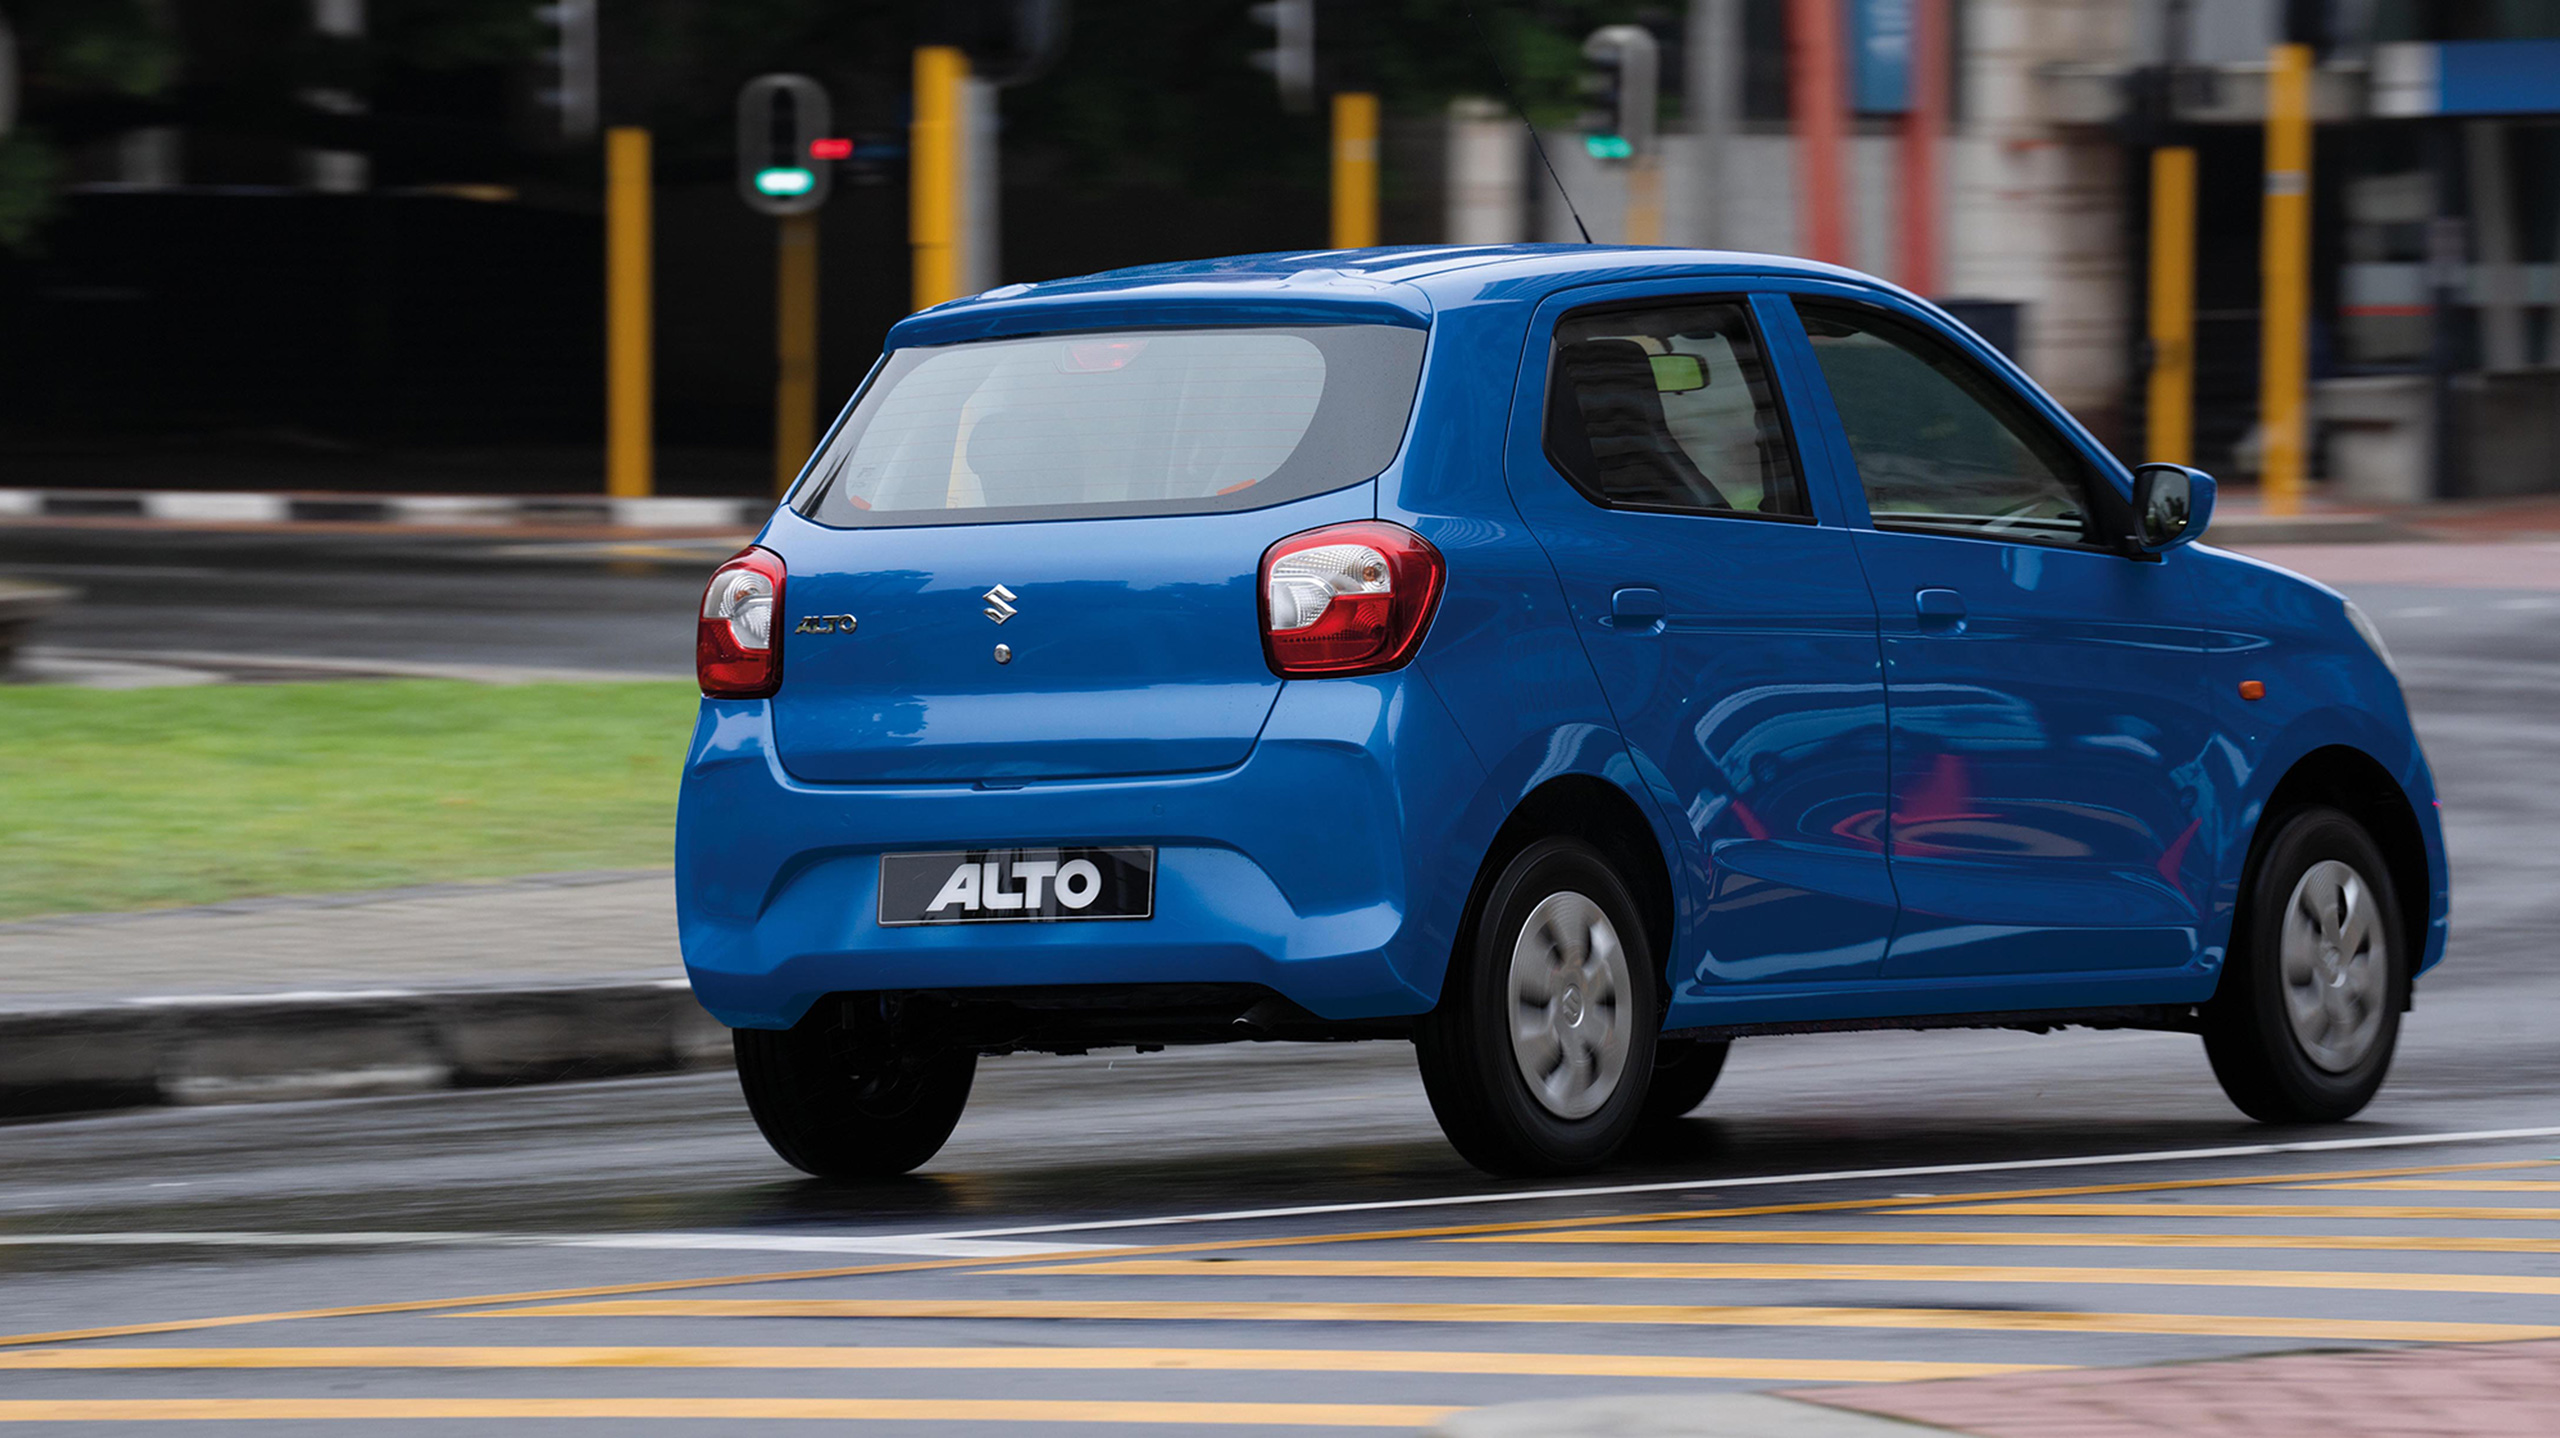 Alto front side driving on roundabout